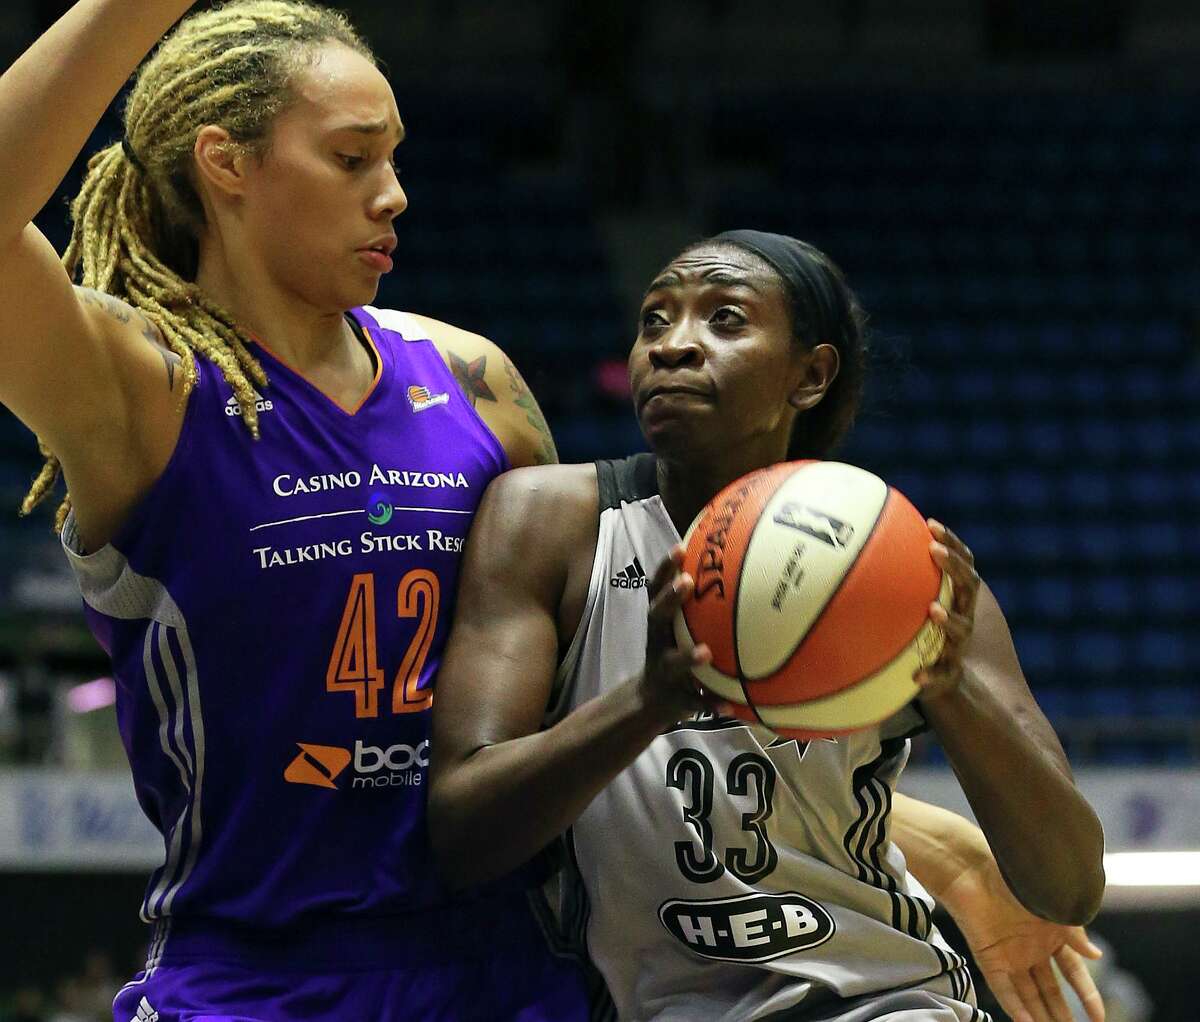 Sophia Young-Malcolm challenges Brittney Griner under the hoop as the Stars host the Phoenix Mercury at Freeman Coliseum on September 5, 2015.